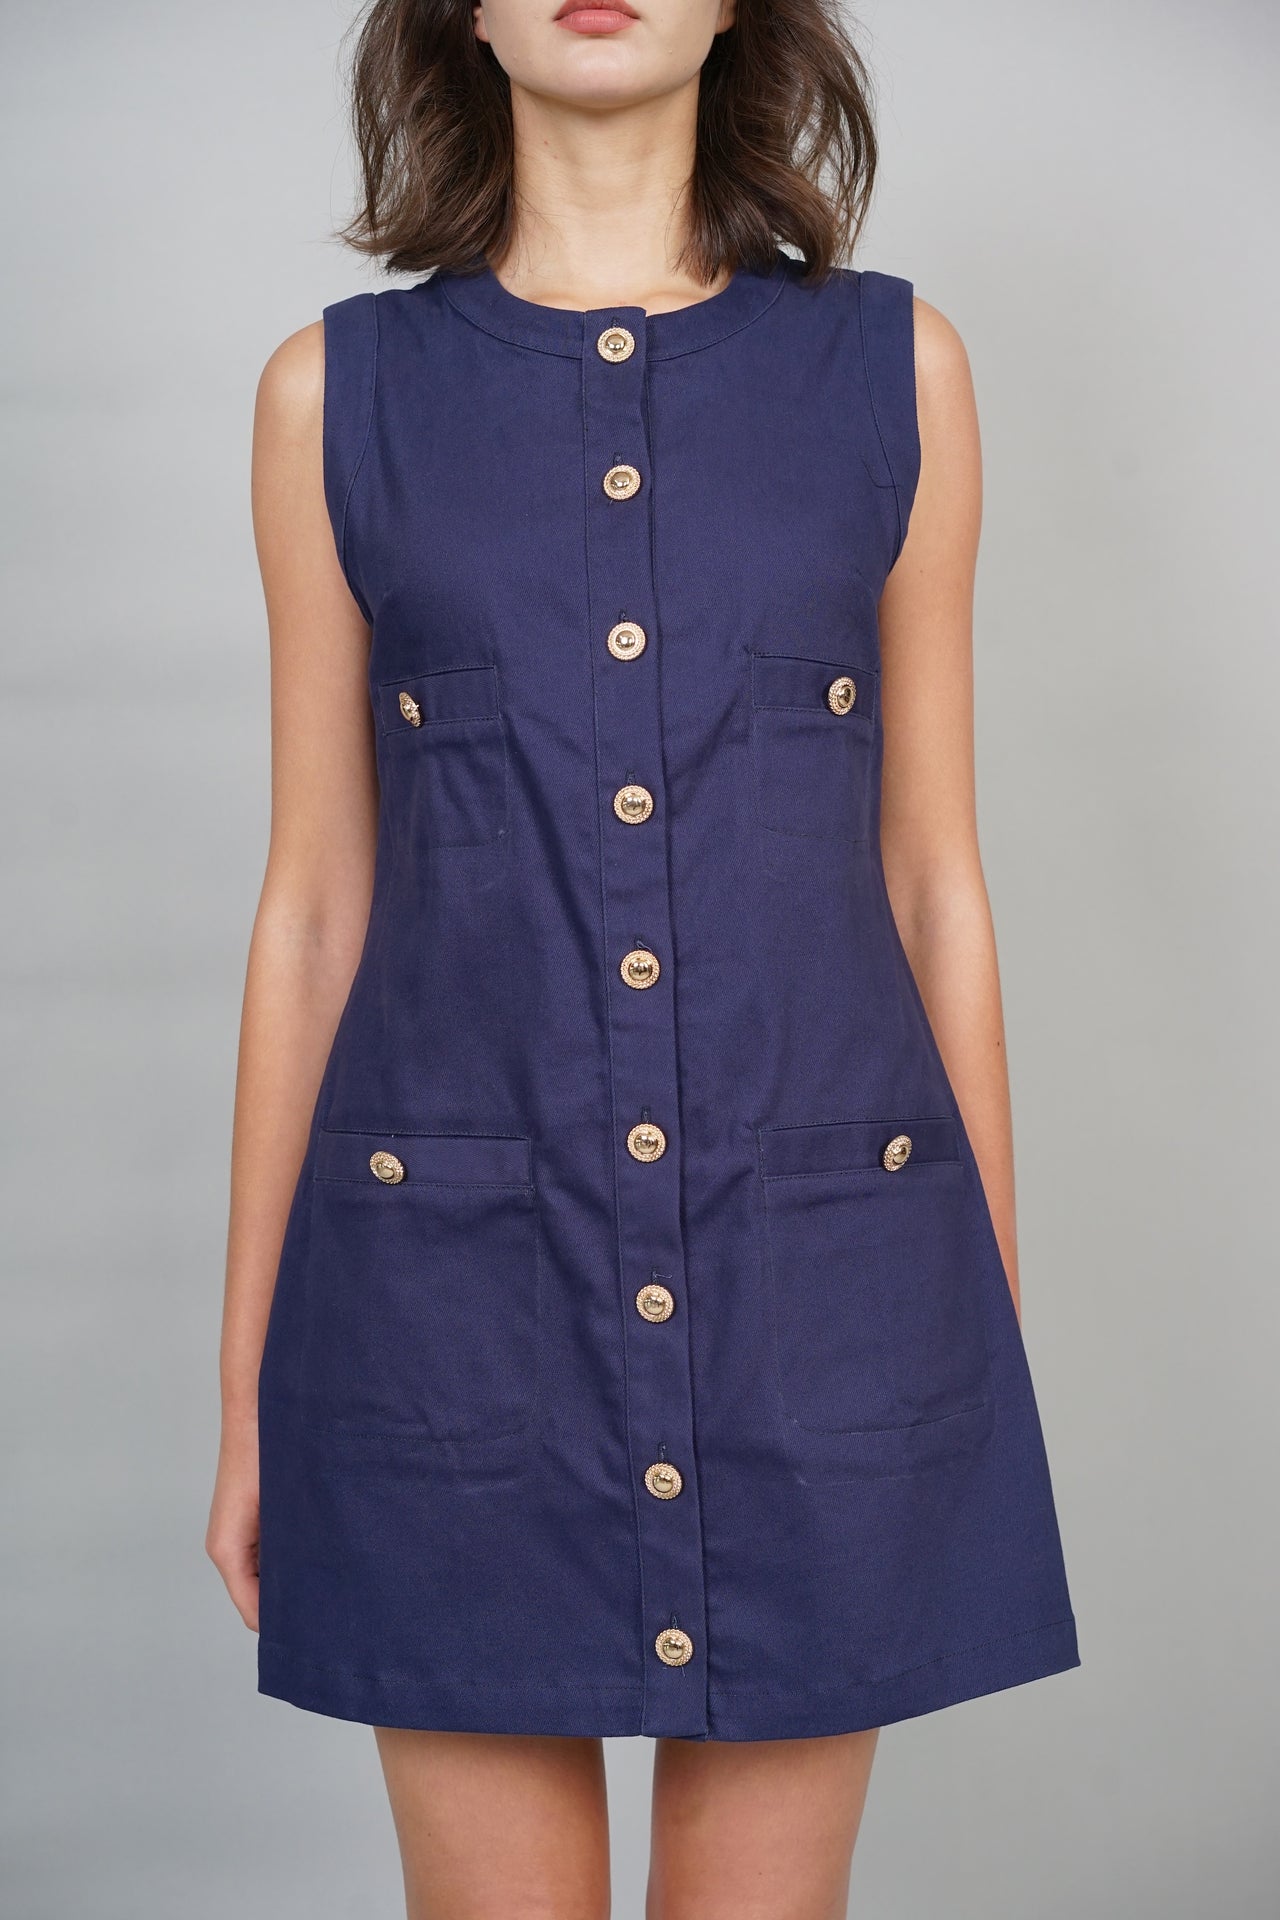 Buttoned Utility Denim Shift Dress in Navy - Arriving Soon